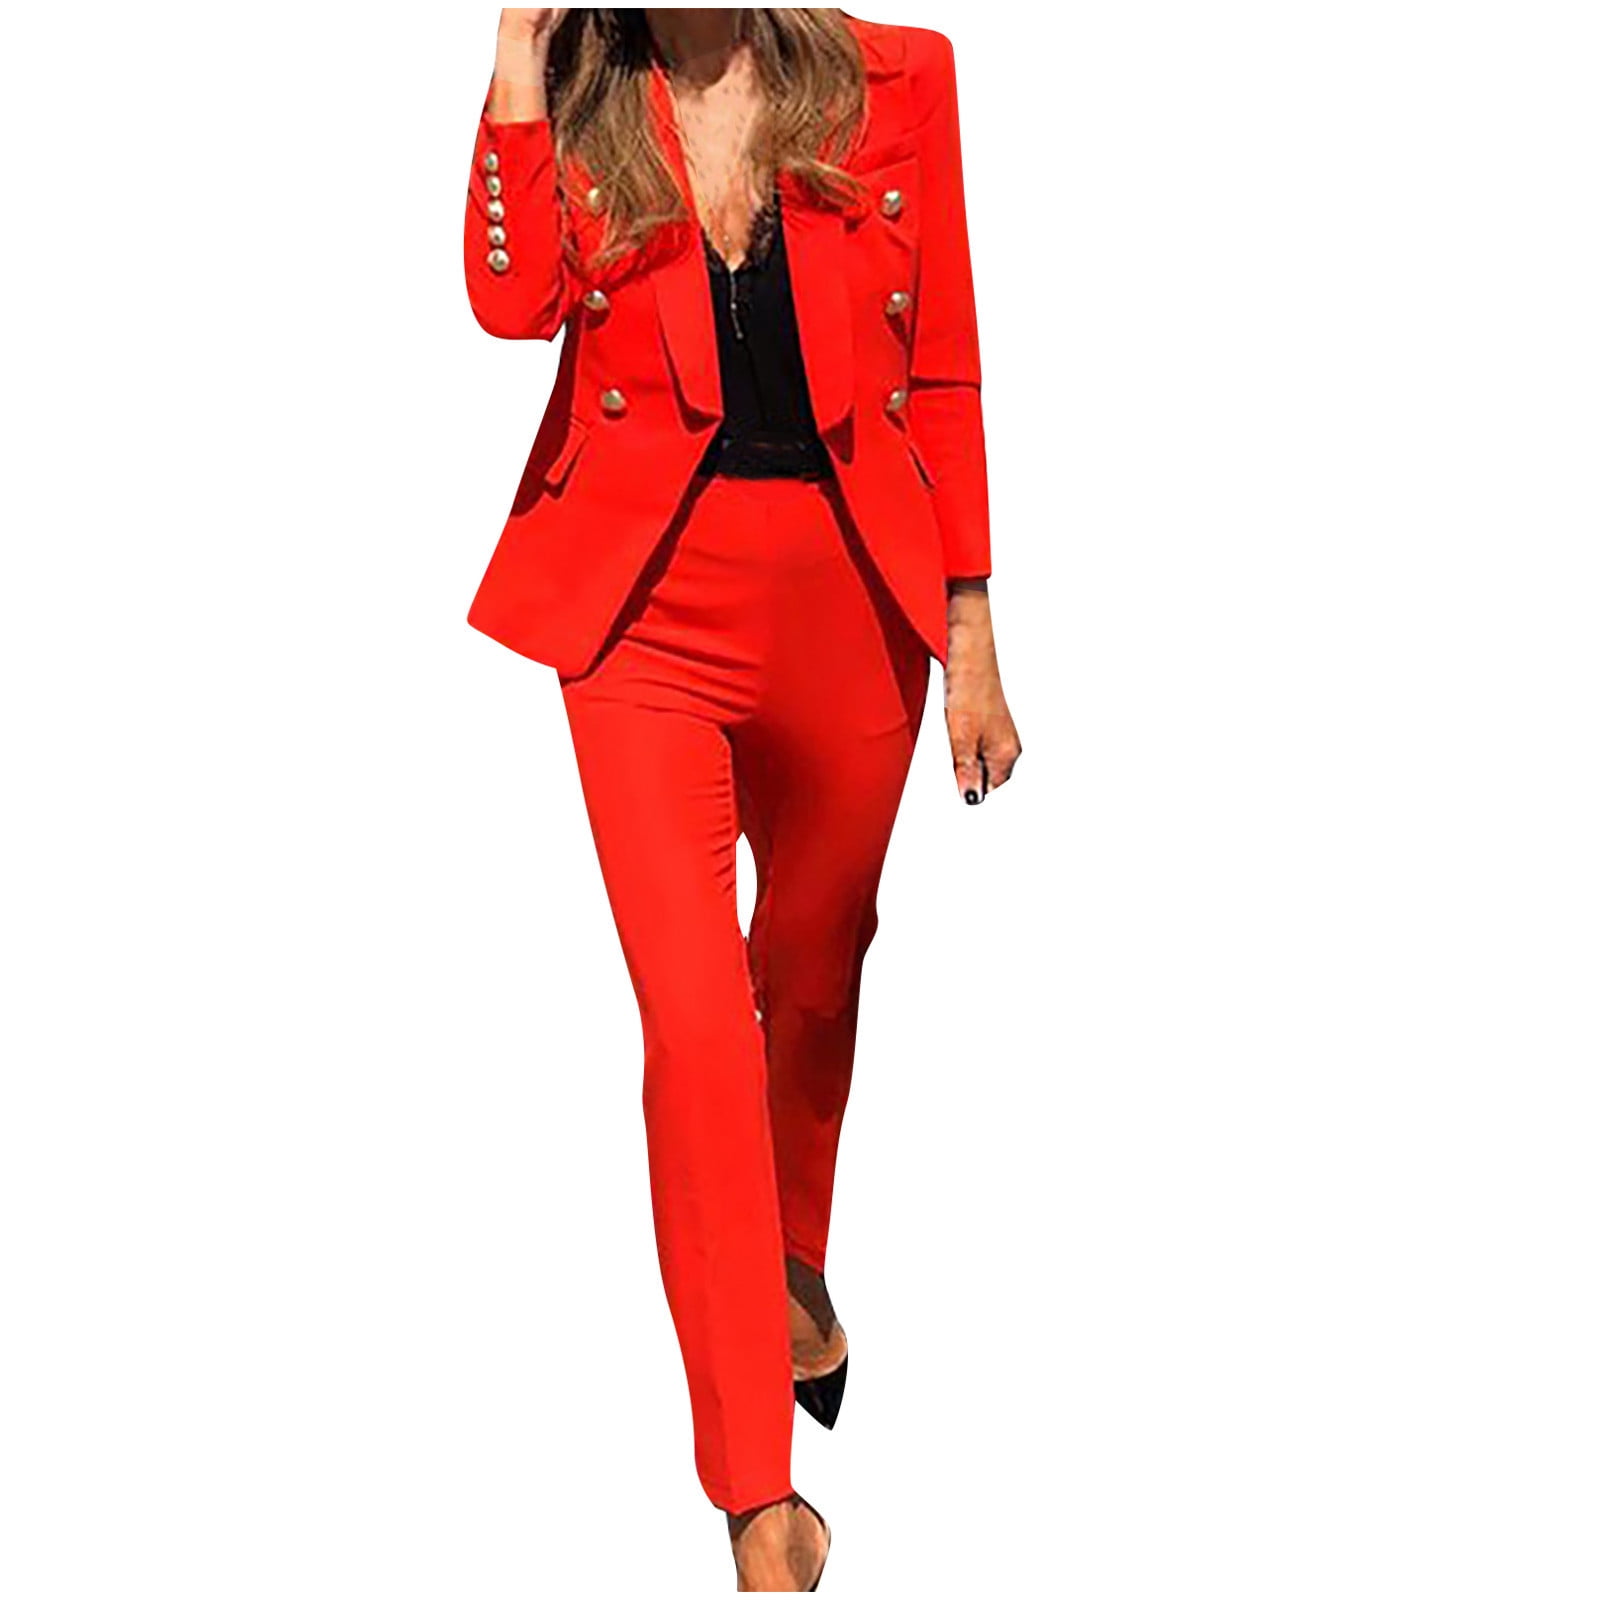 YWDJ Two Piece Outfits for Women Plus Size Long Sleeve Solid Suit Pants  Casual Elegant Business Suit Sets Red XXXL